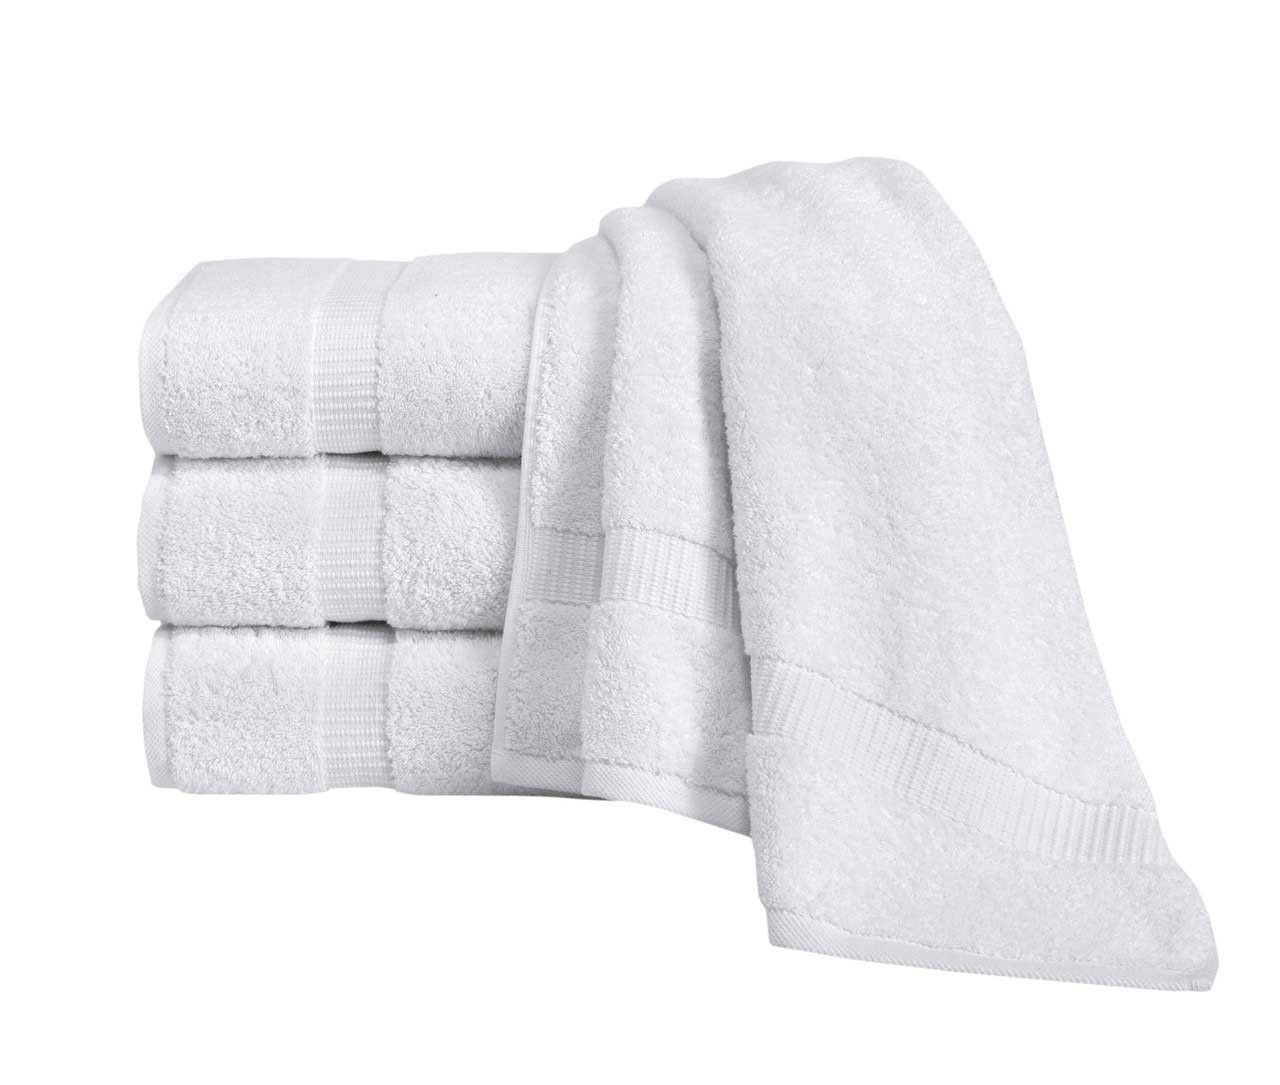 What is the GSM of the hand towels and wash cloths in the White Royal Turkish Towels Villa Collection?